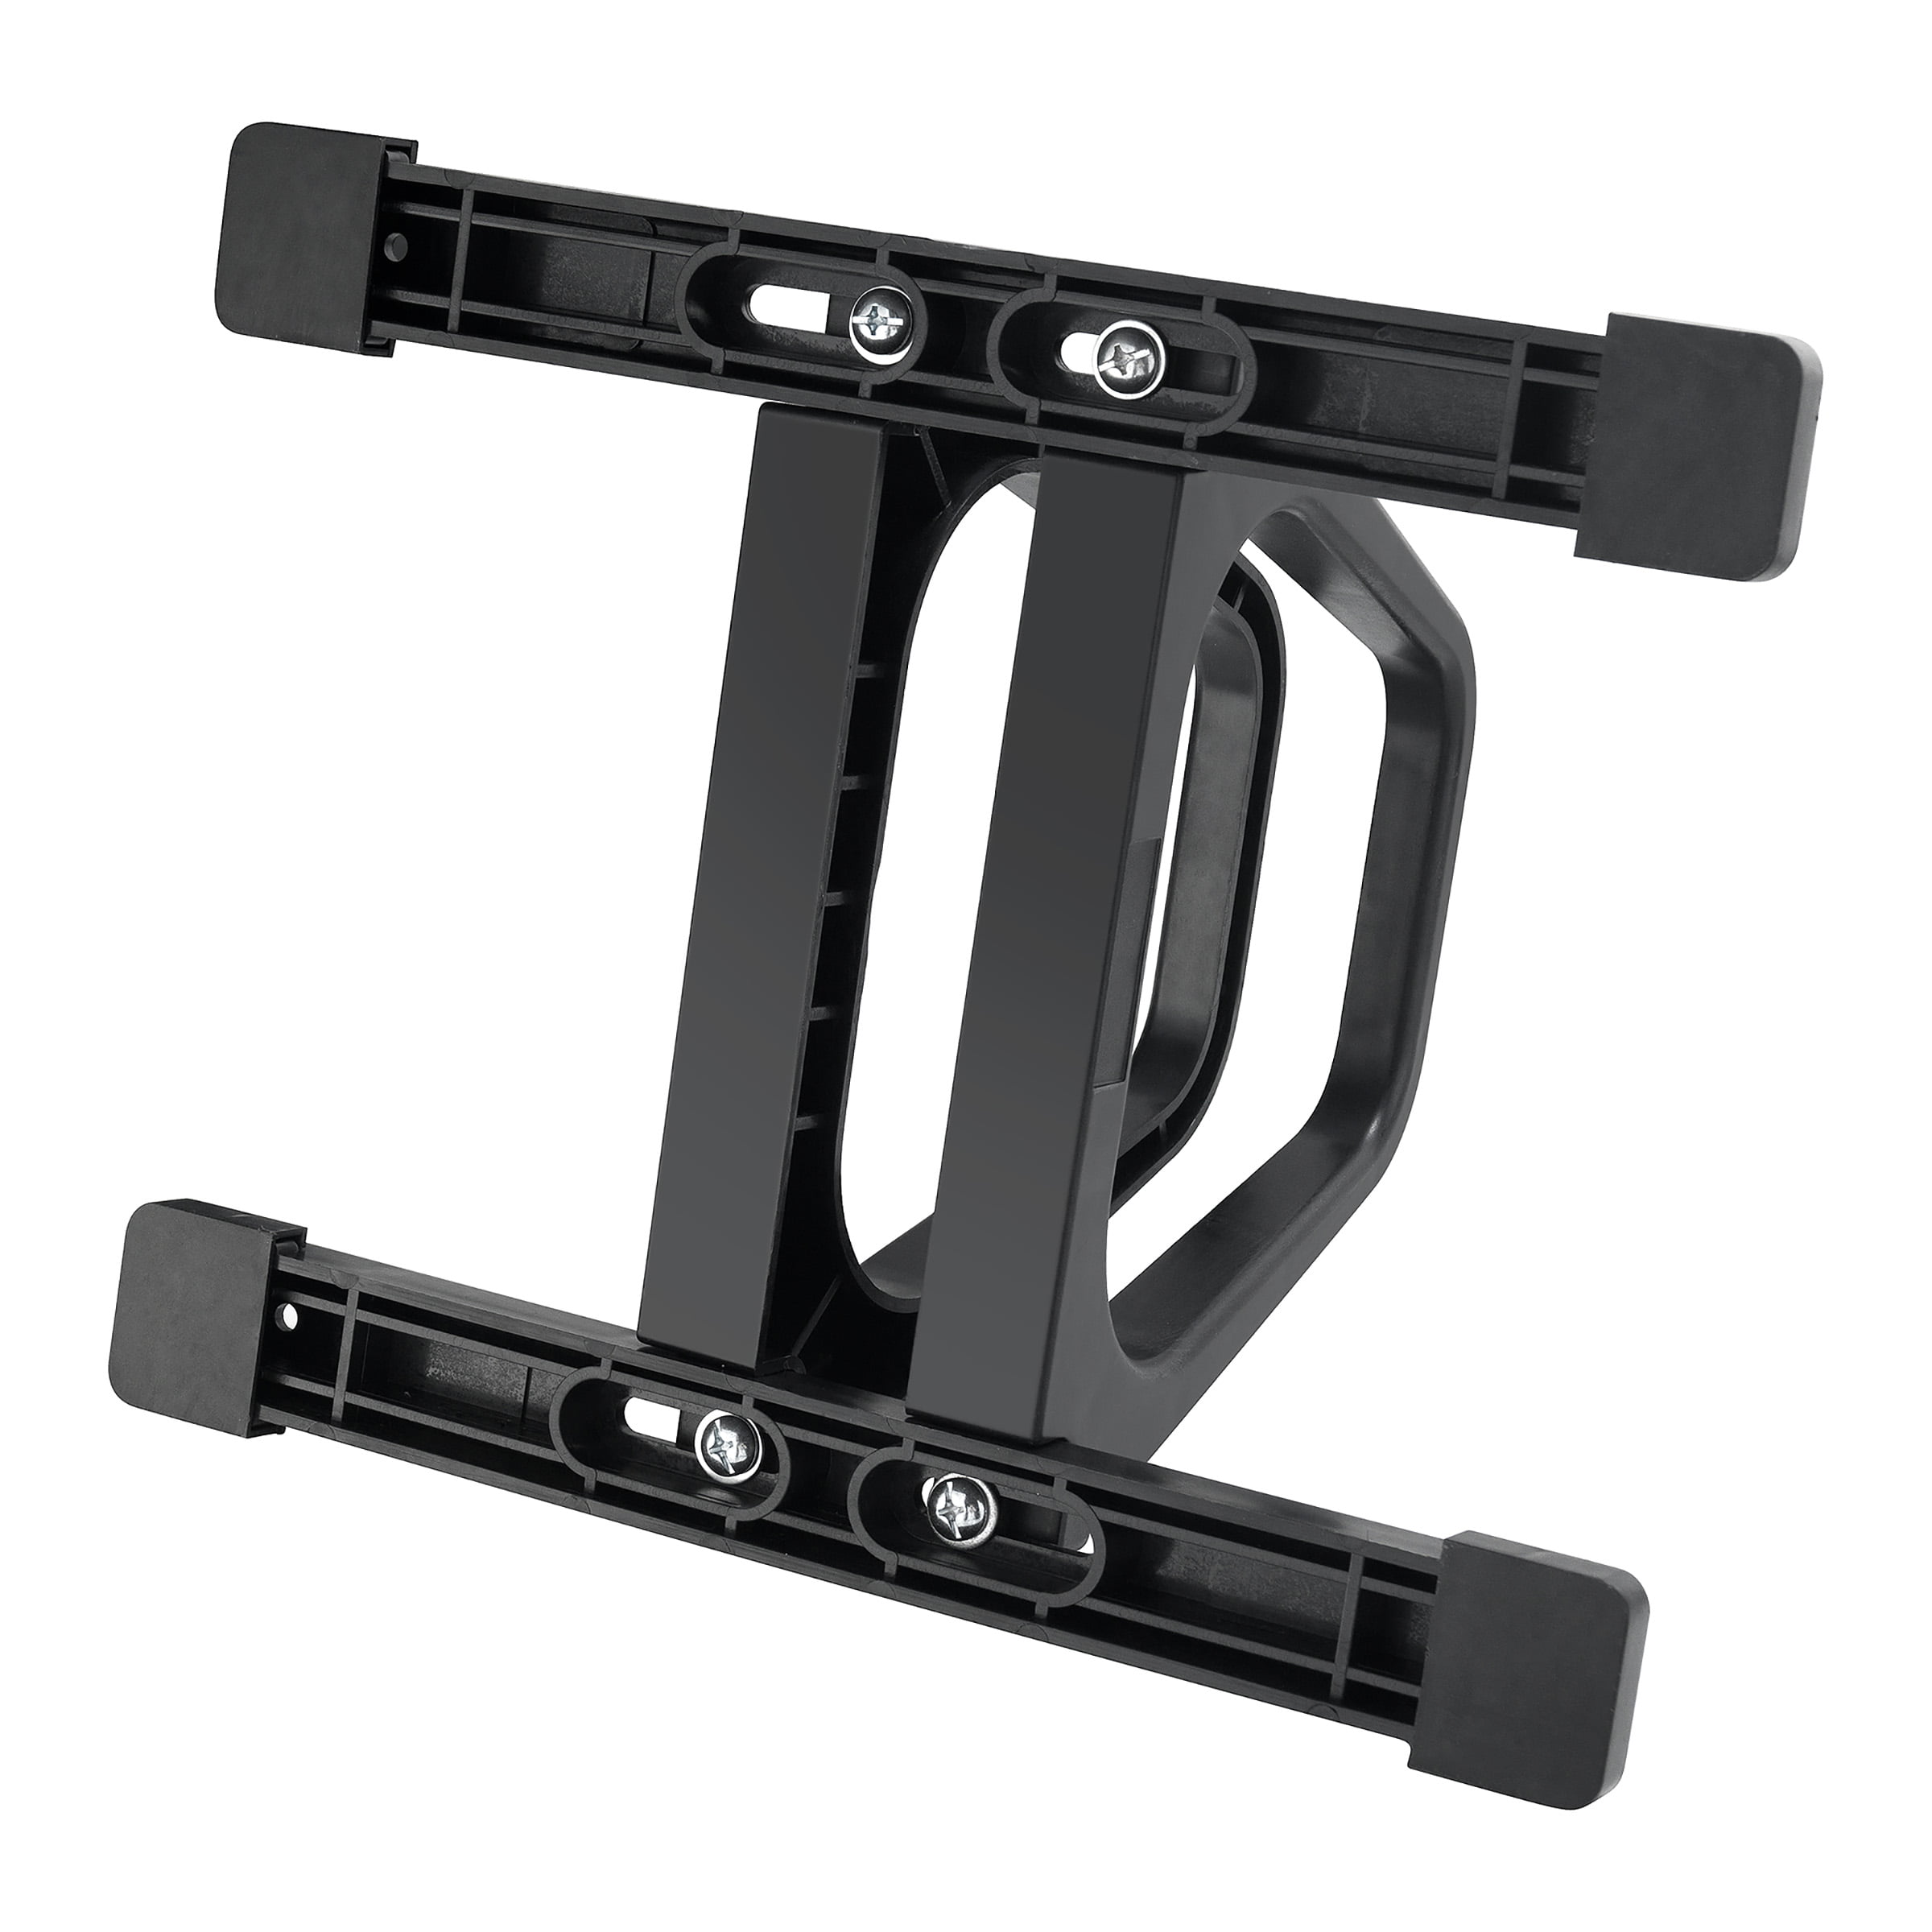 rad cycle products rad cycle bike stand portable floor rack bicycle park for smaller bikes